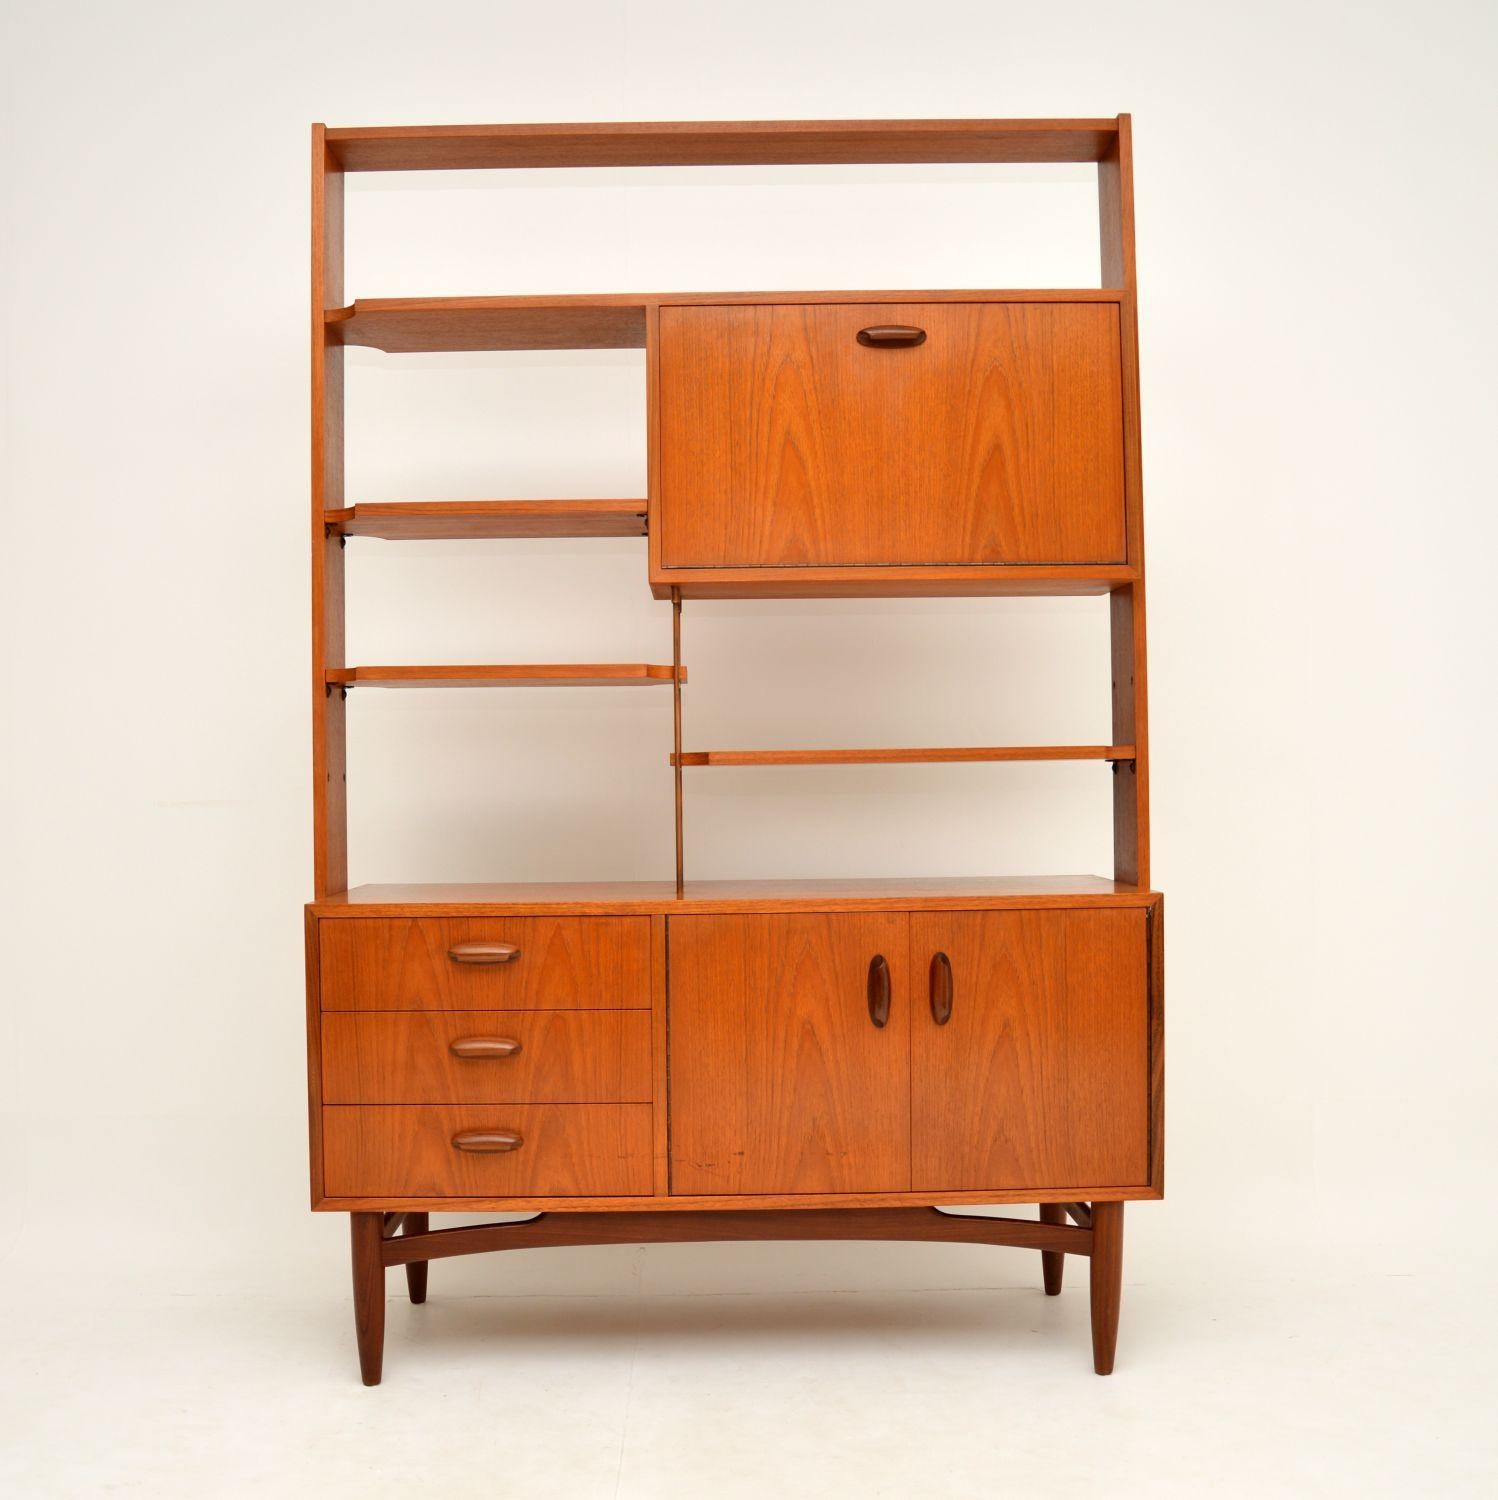 A stylish, top quality and very useful teak vintage bookcase / cabinet by G- Plan, dating from the 1960s. This is perfect for use as a wall unit or a room divider, as the back is beautifully finished as well.

The shelves are adjustable, and this